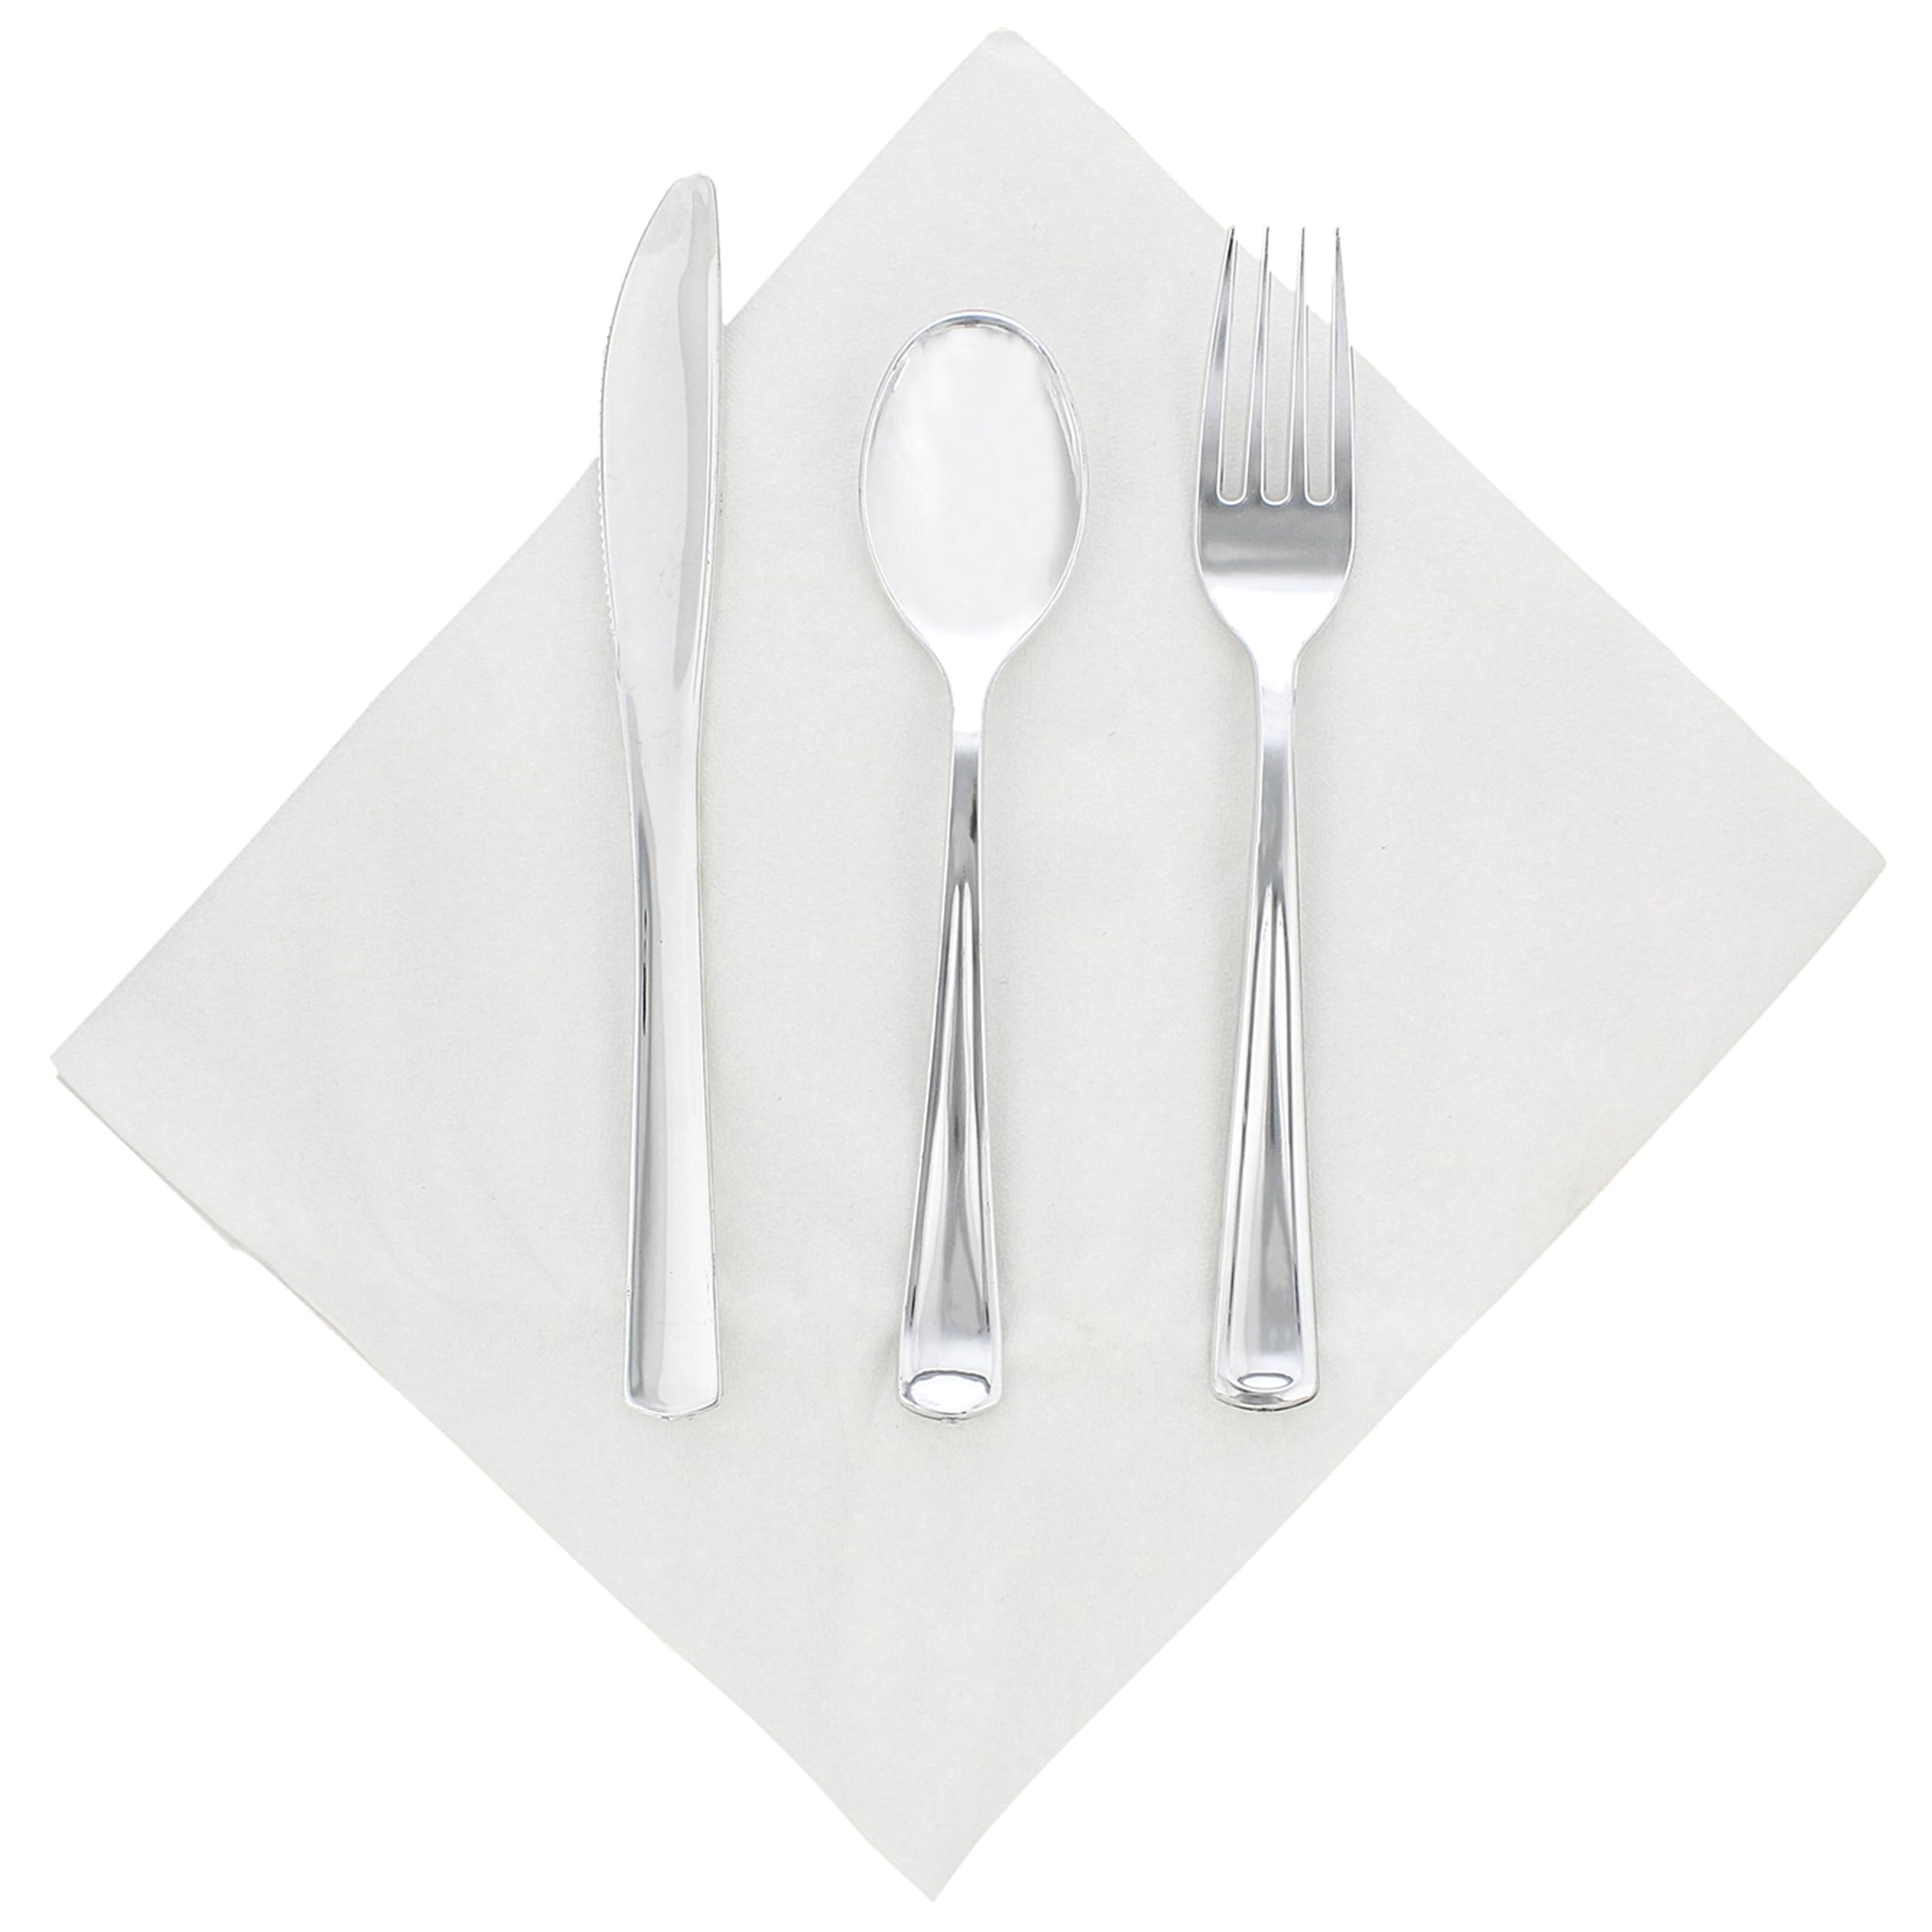 Spec101 Silver Plastic Silverware Sets for Parties Set of 300 - Pre Rolled Disposable Cutlery Individually Wrapped Plastic Utensils Set with Napkins for Weddings, Anniversaries, and Events